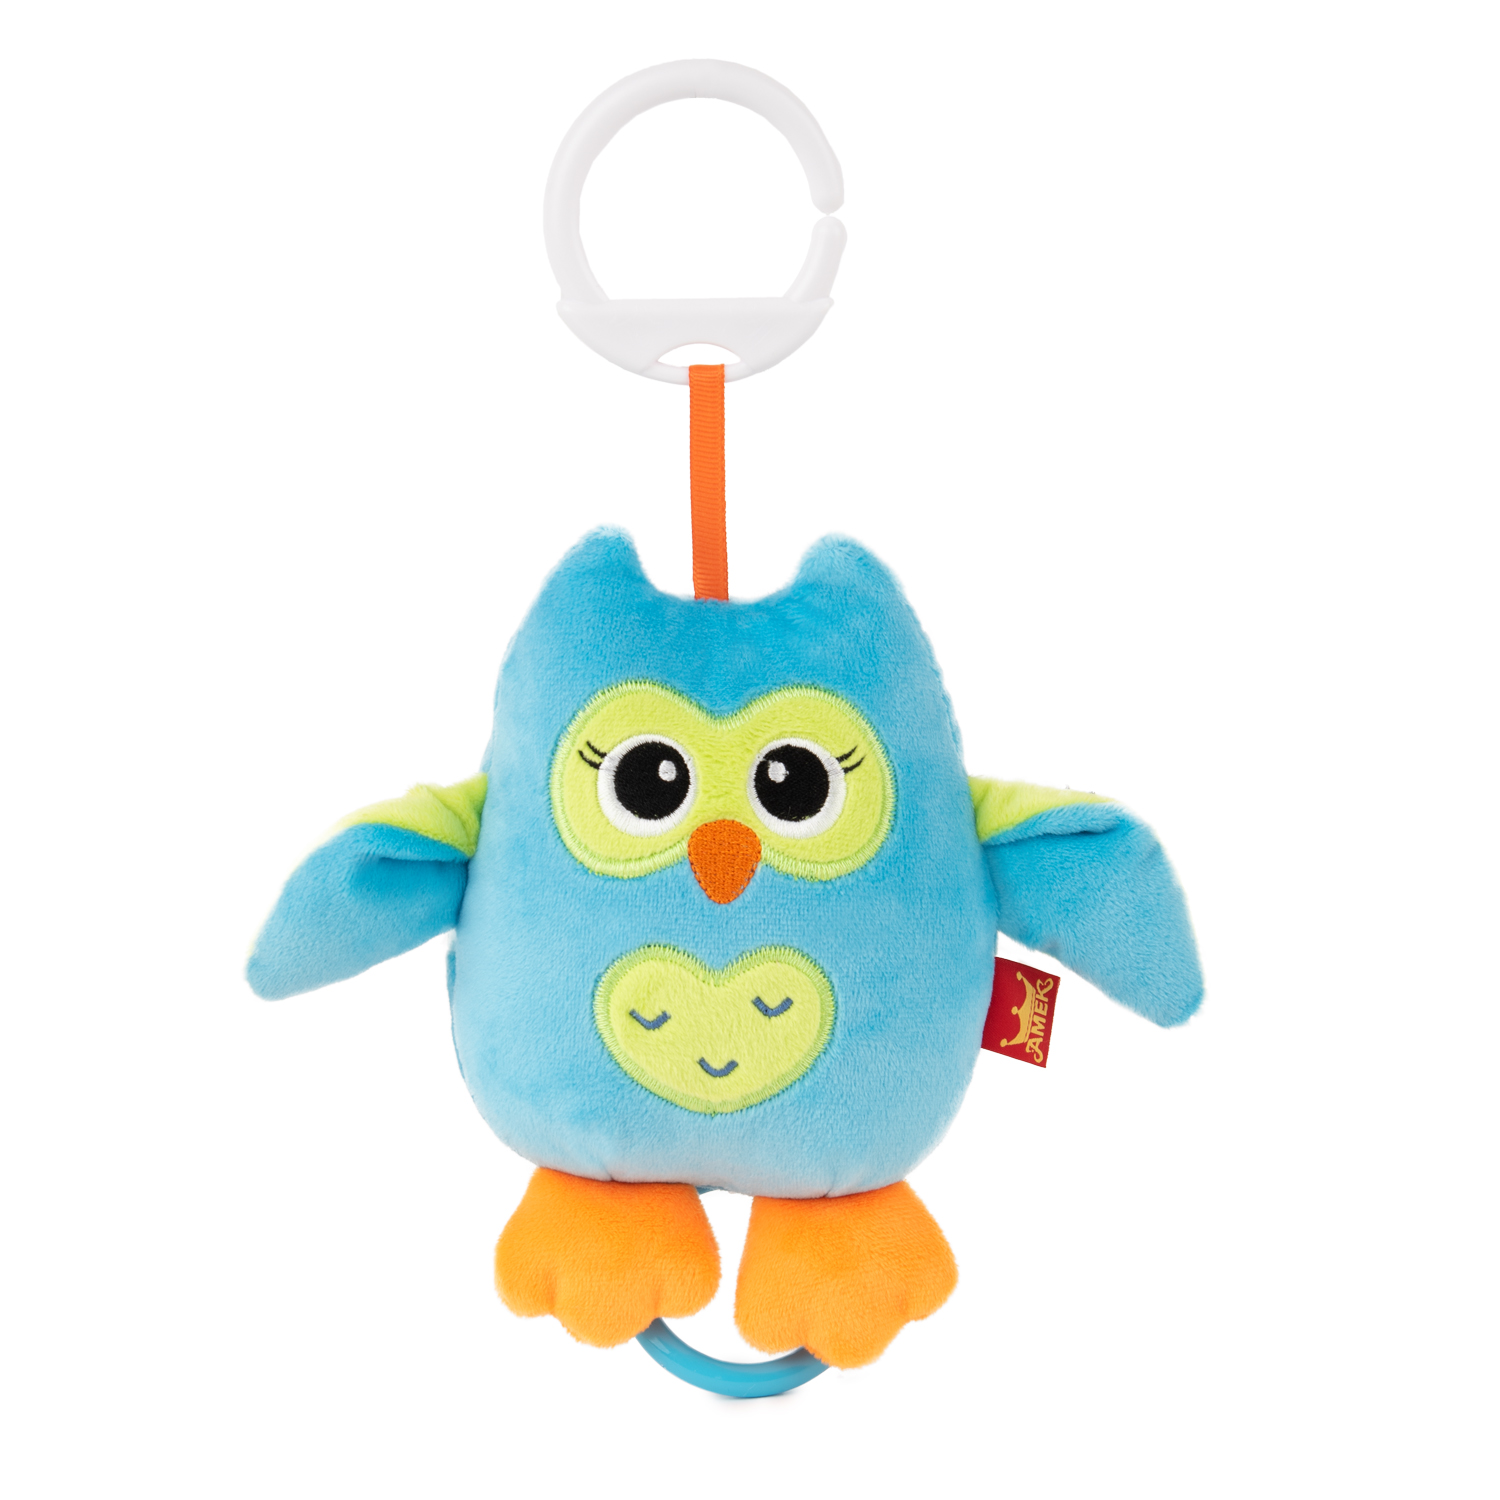 Baby musical owl - Blue with green